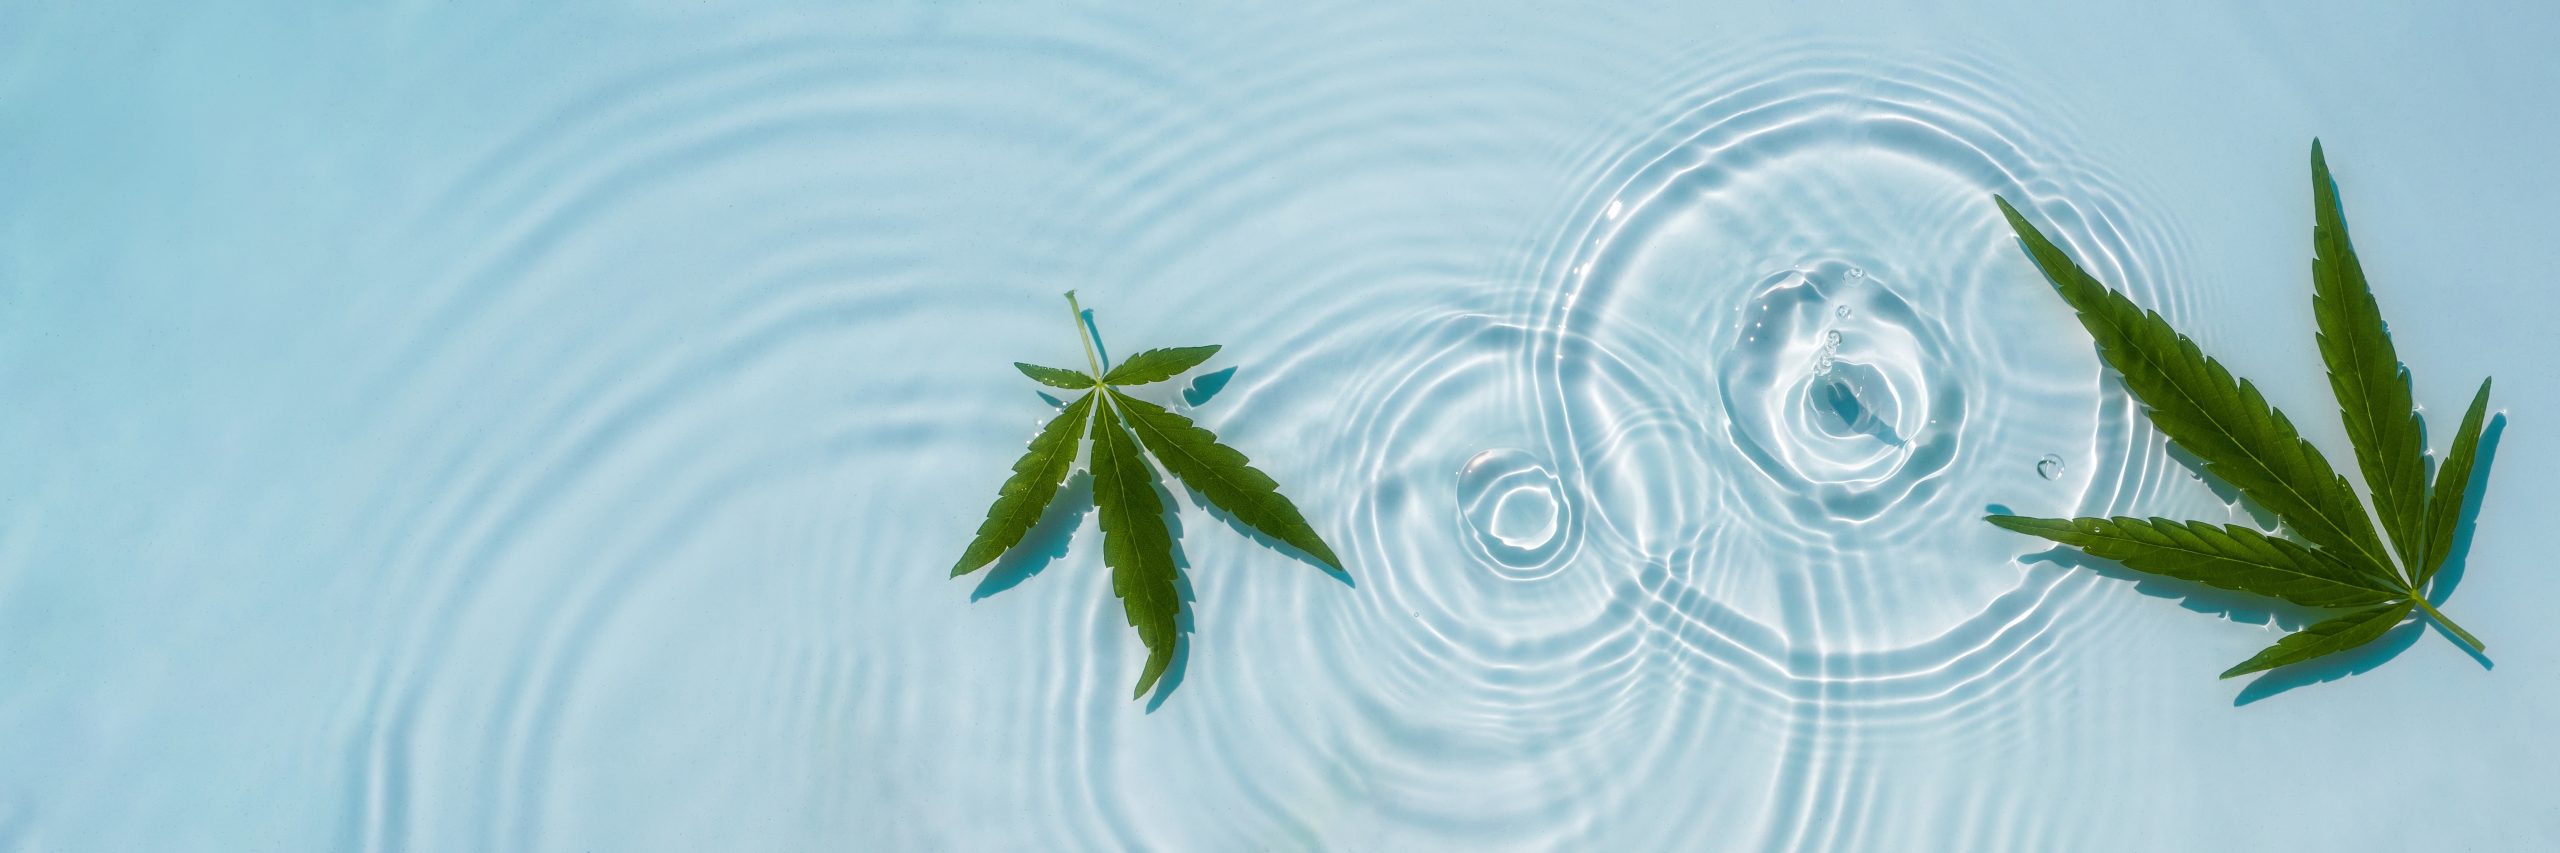 Blue,Water,Background,With,Drops,,Waves,And,Leaves,Of,Hemp,